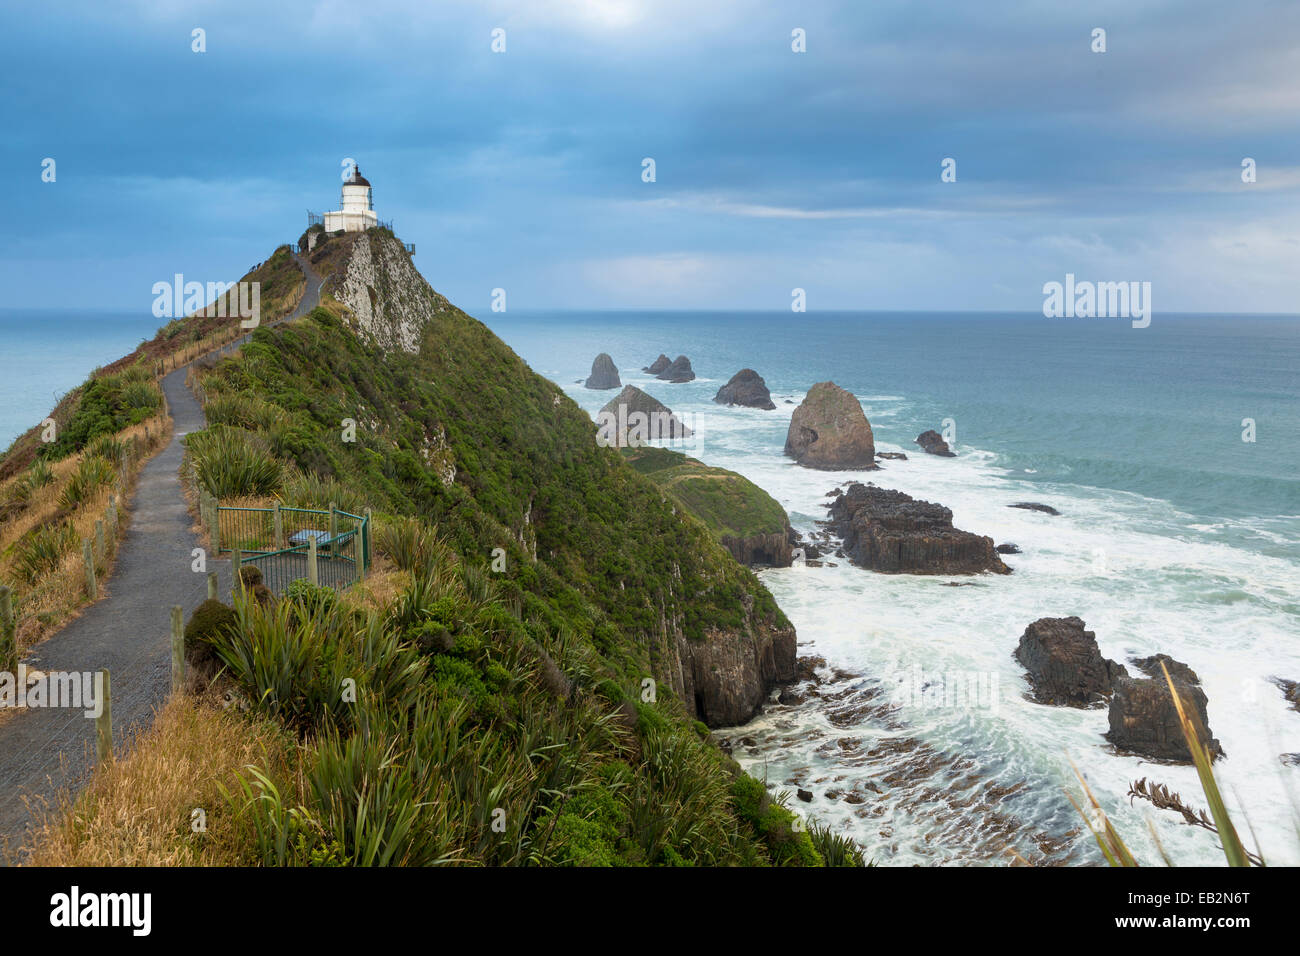 The Lighthouse at Nugget Point, Nugget Point, Ahuriri Flat, Otago Region, New Zealand Stock Photo